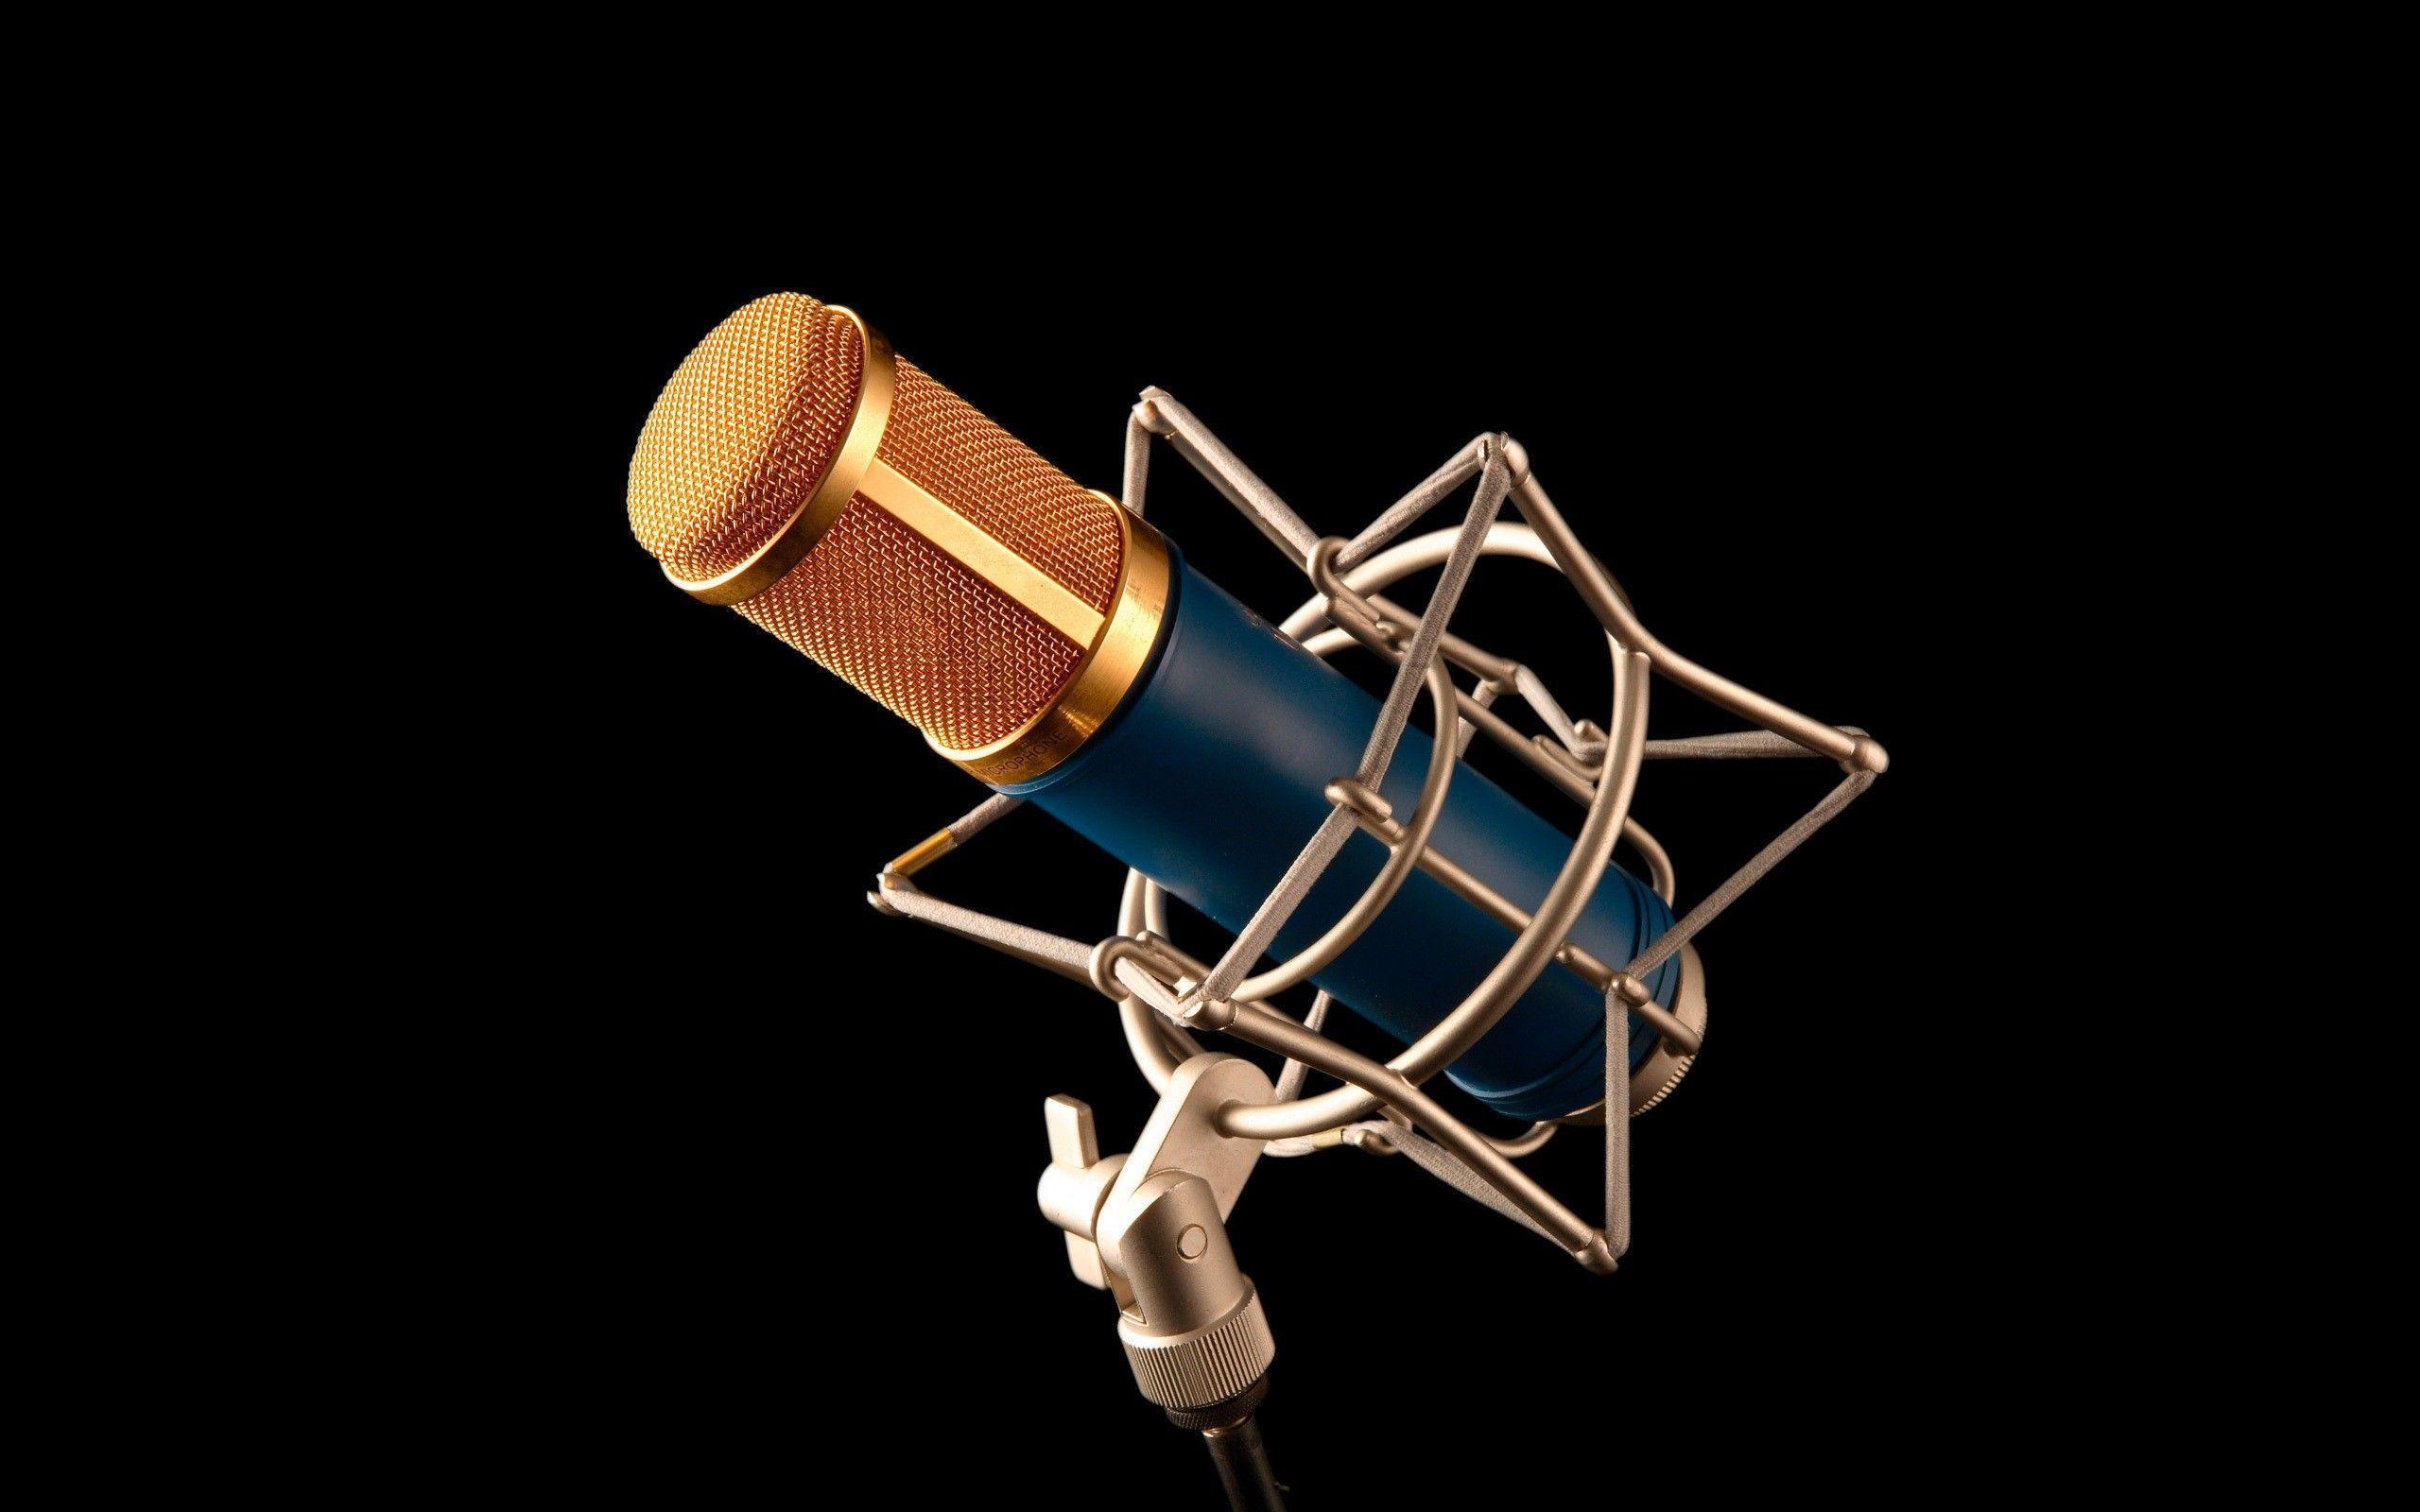 High Quality Microphone Wallpaper. Full HD Picture